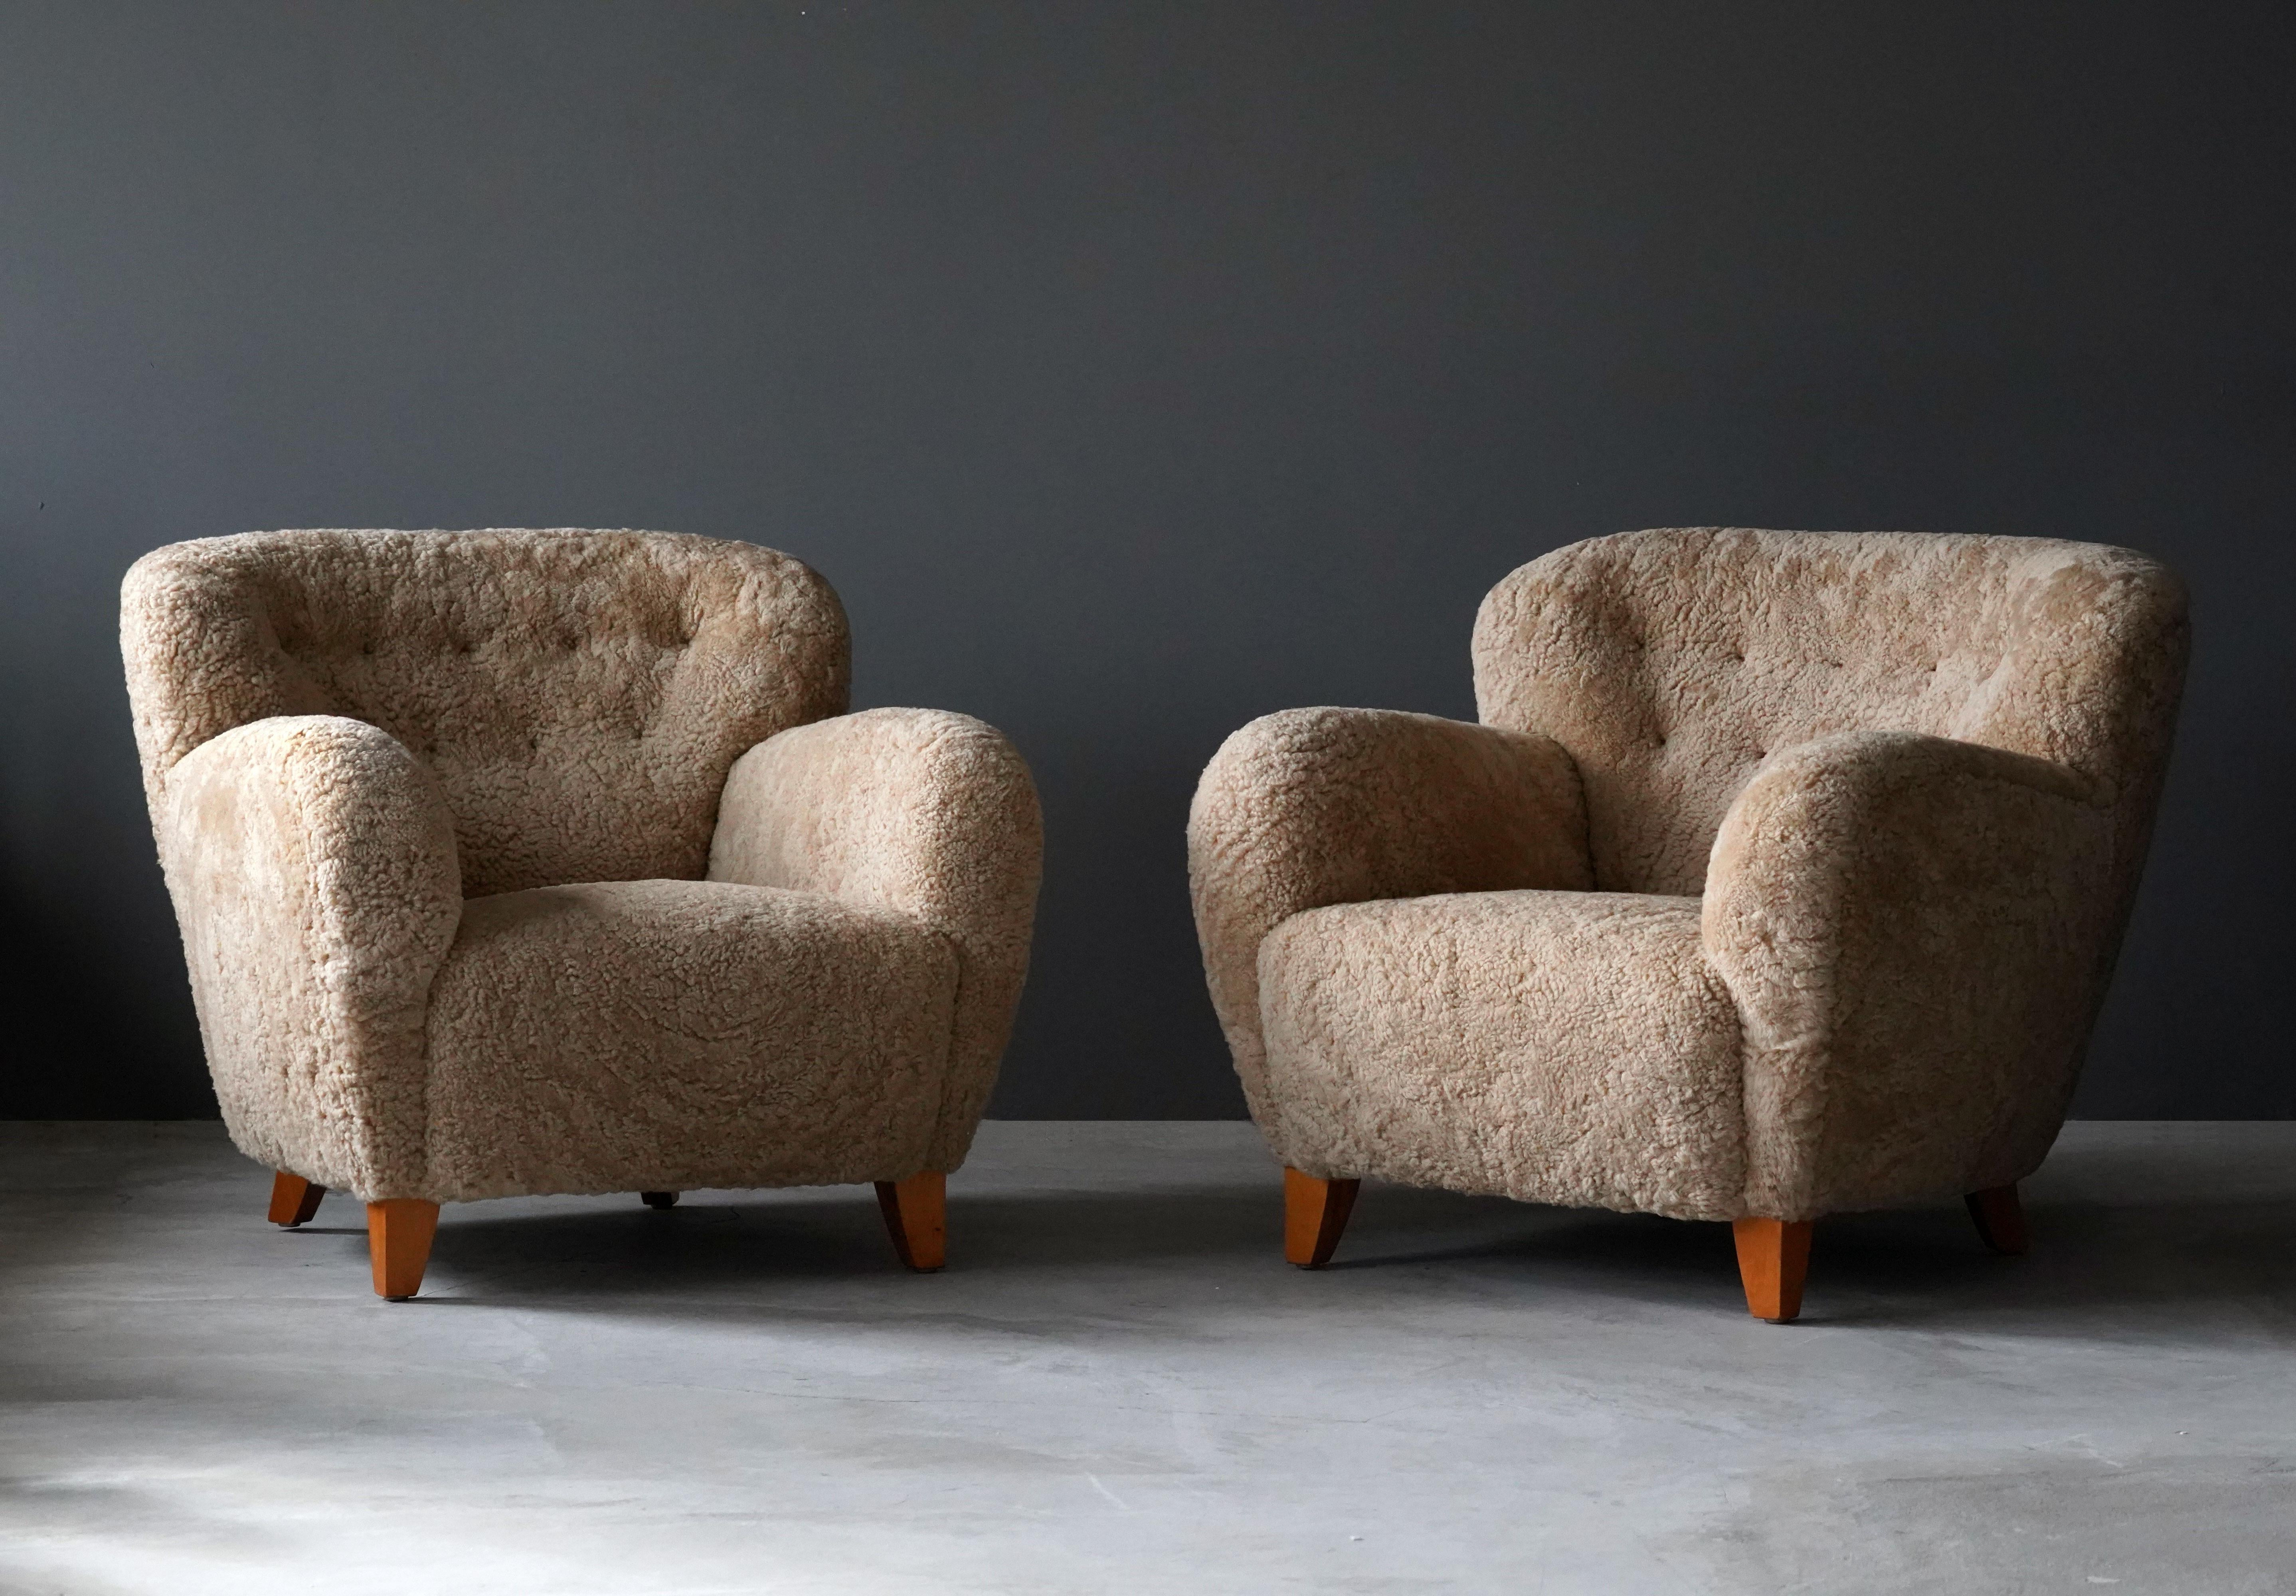 A pair of organic modernist lounge chairs. Designed and produced in Sweden, 1940s. Reupholstered in brand new authentic shearling upholstery. 

Similar in style to works by designers such as Flemming Lassen, Gio Ponti, Vladimir Kagan, Philip